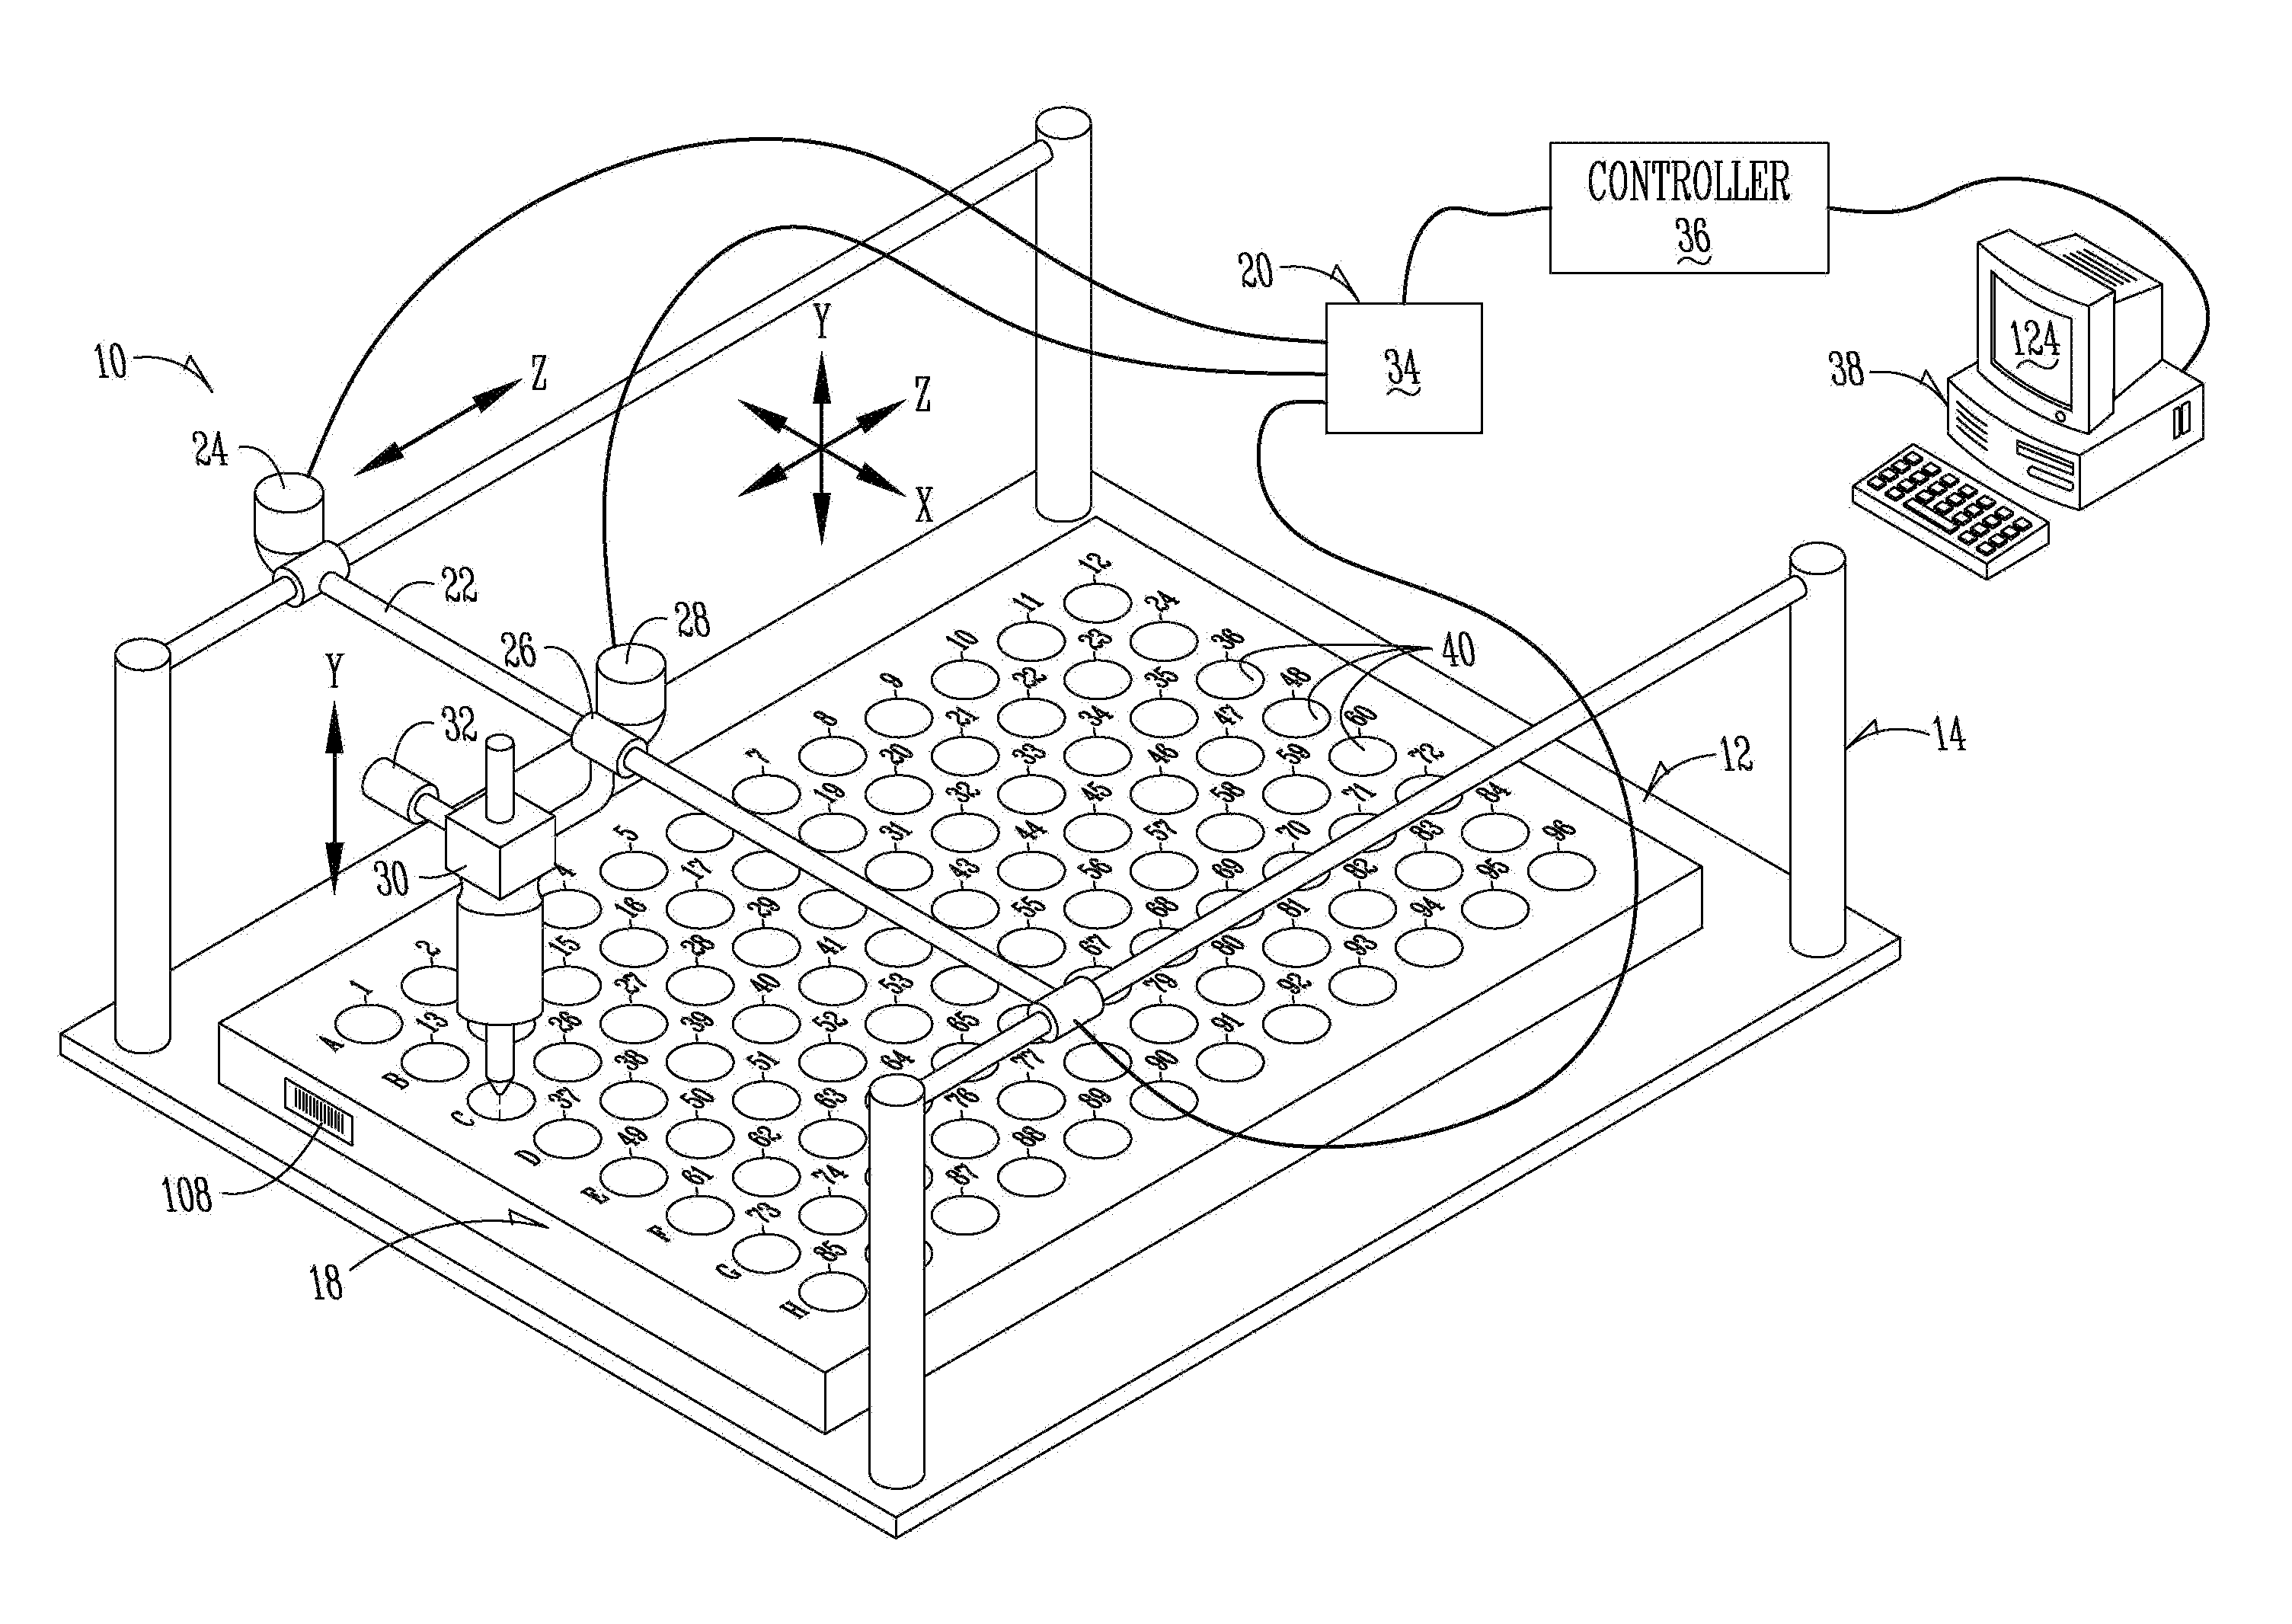 Apparatus for removal of specific seed tissue or structure for seed analysis